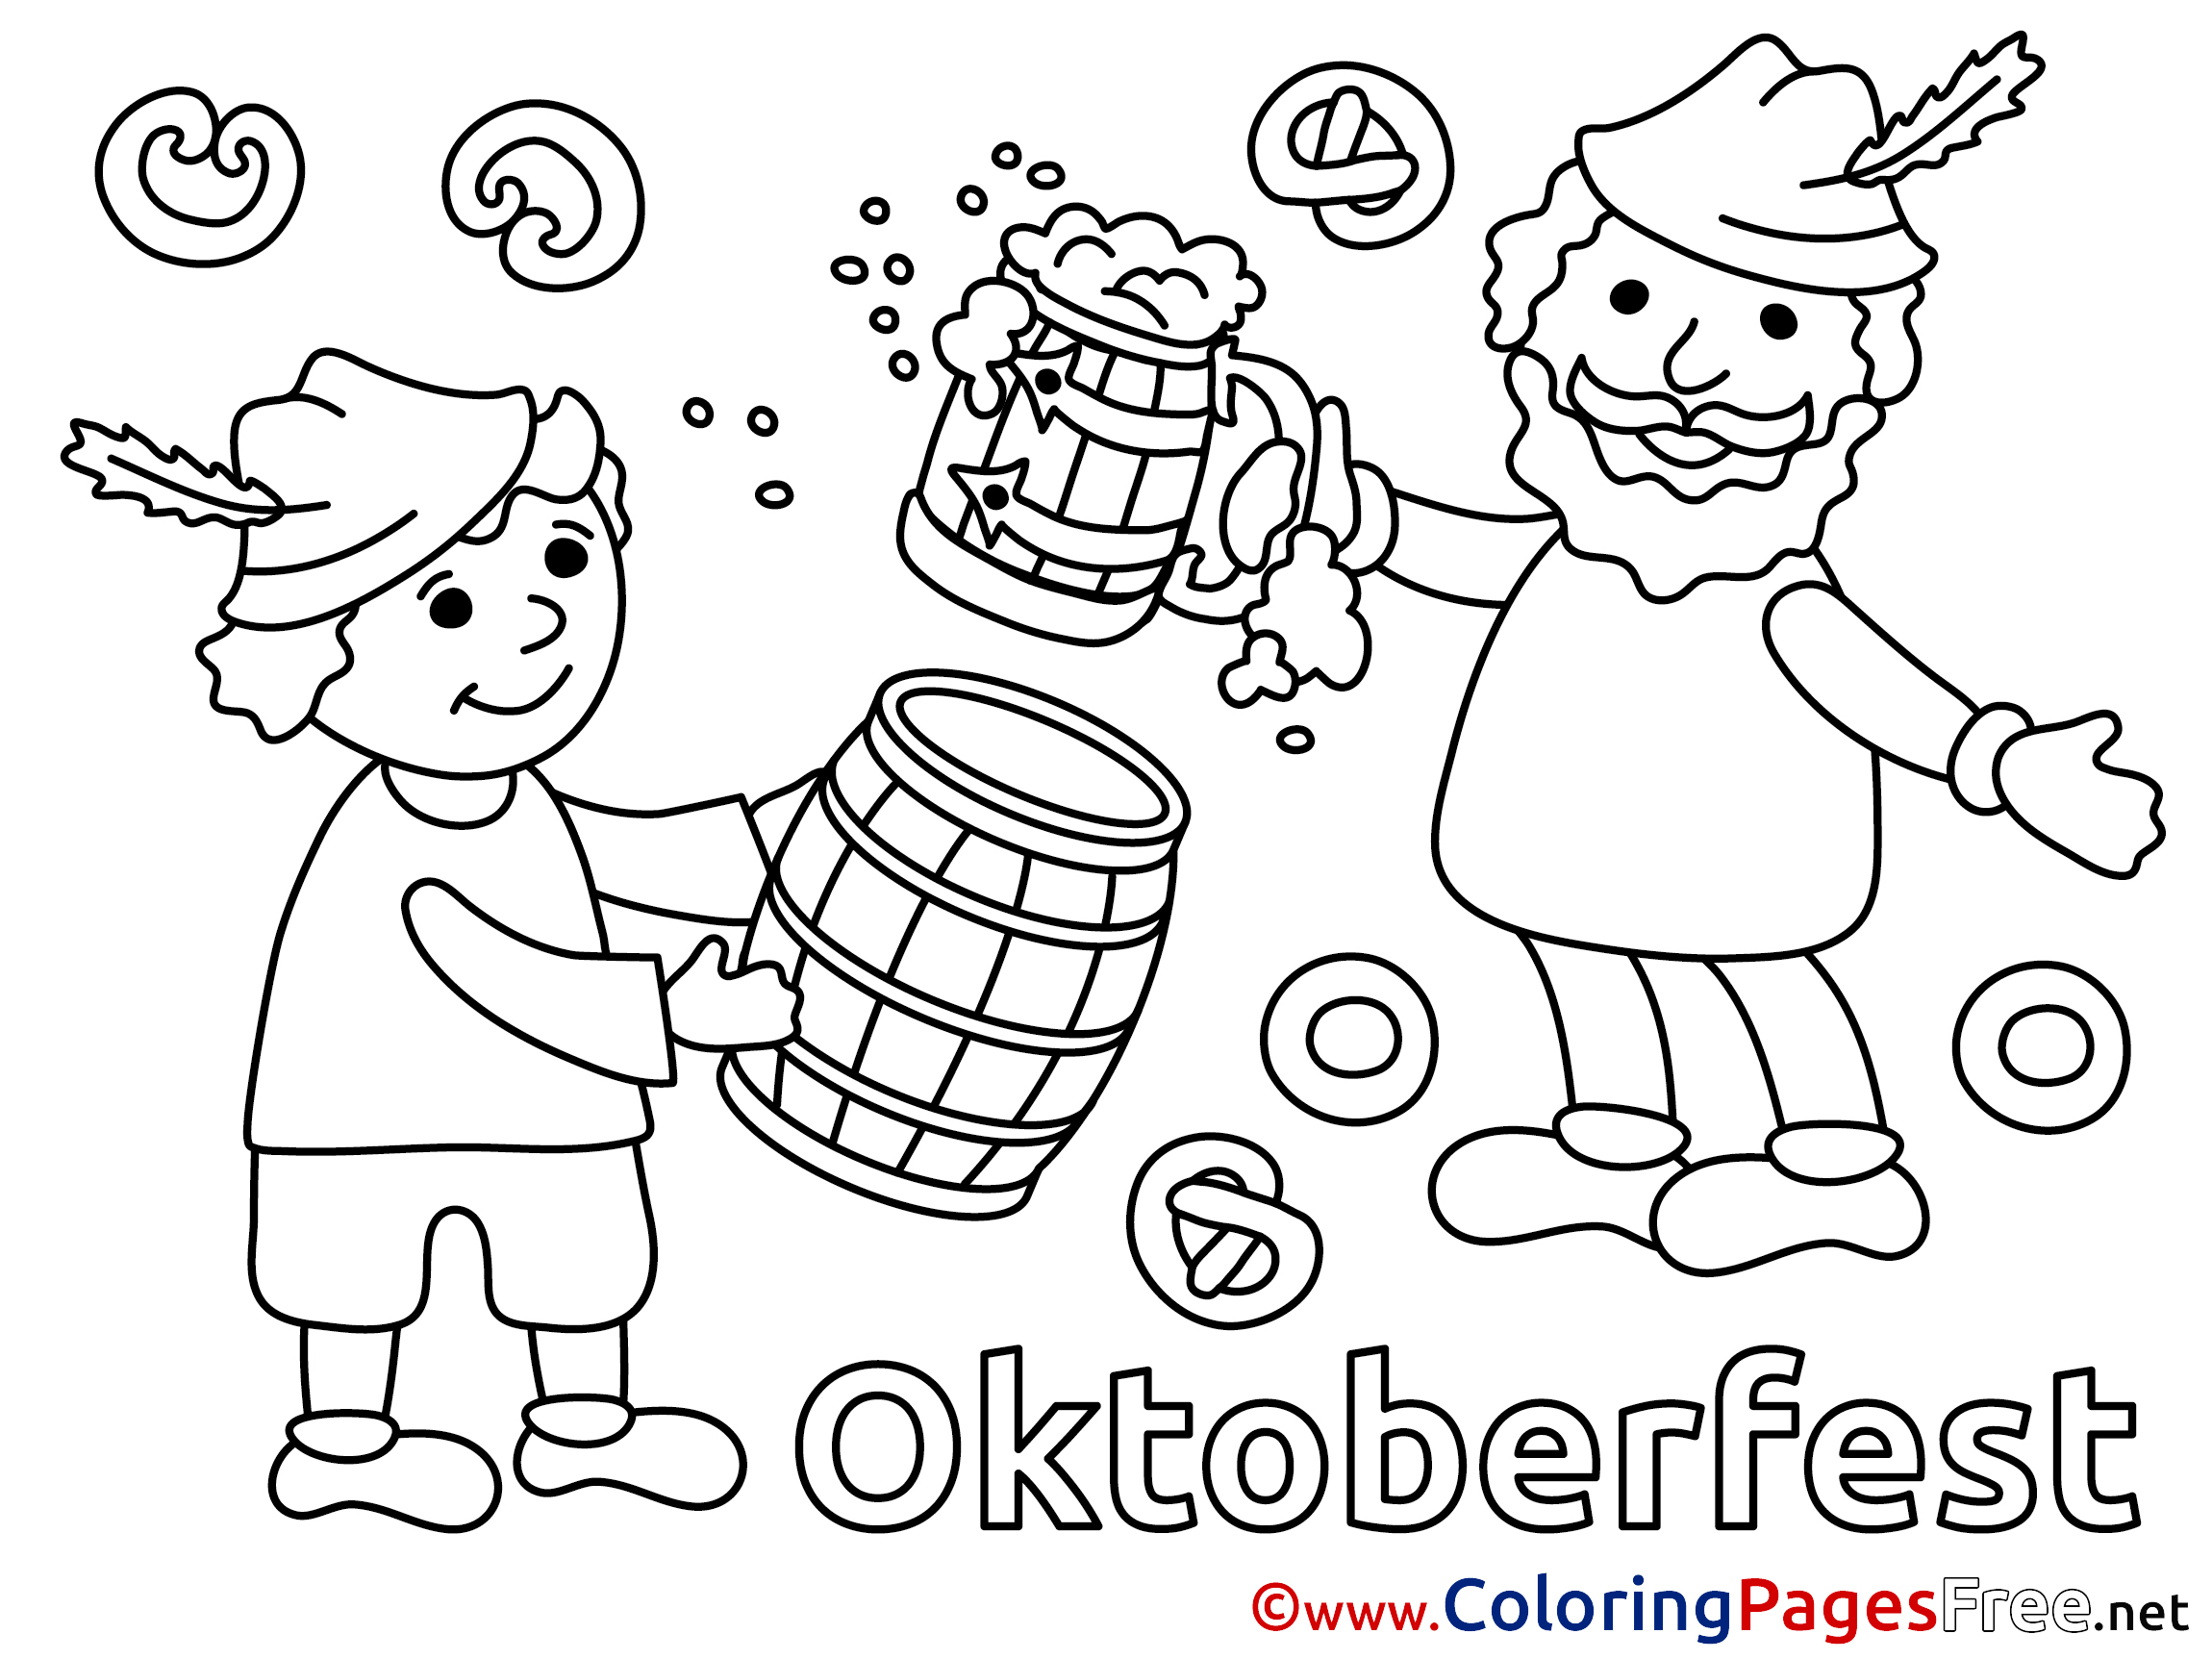 beer-oktoberfest-printable-coloring-pages-for-free